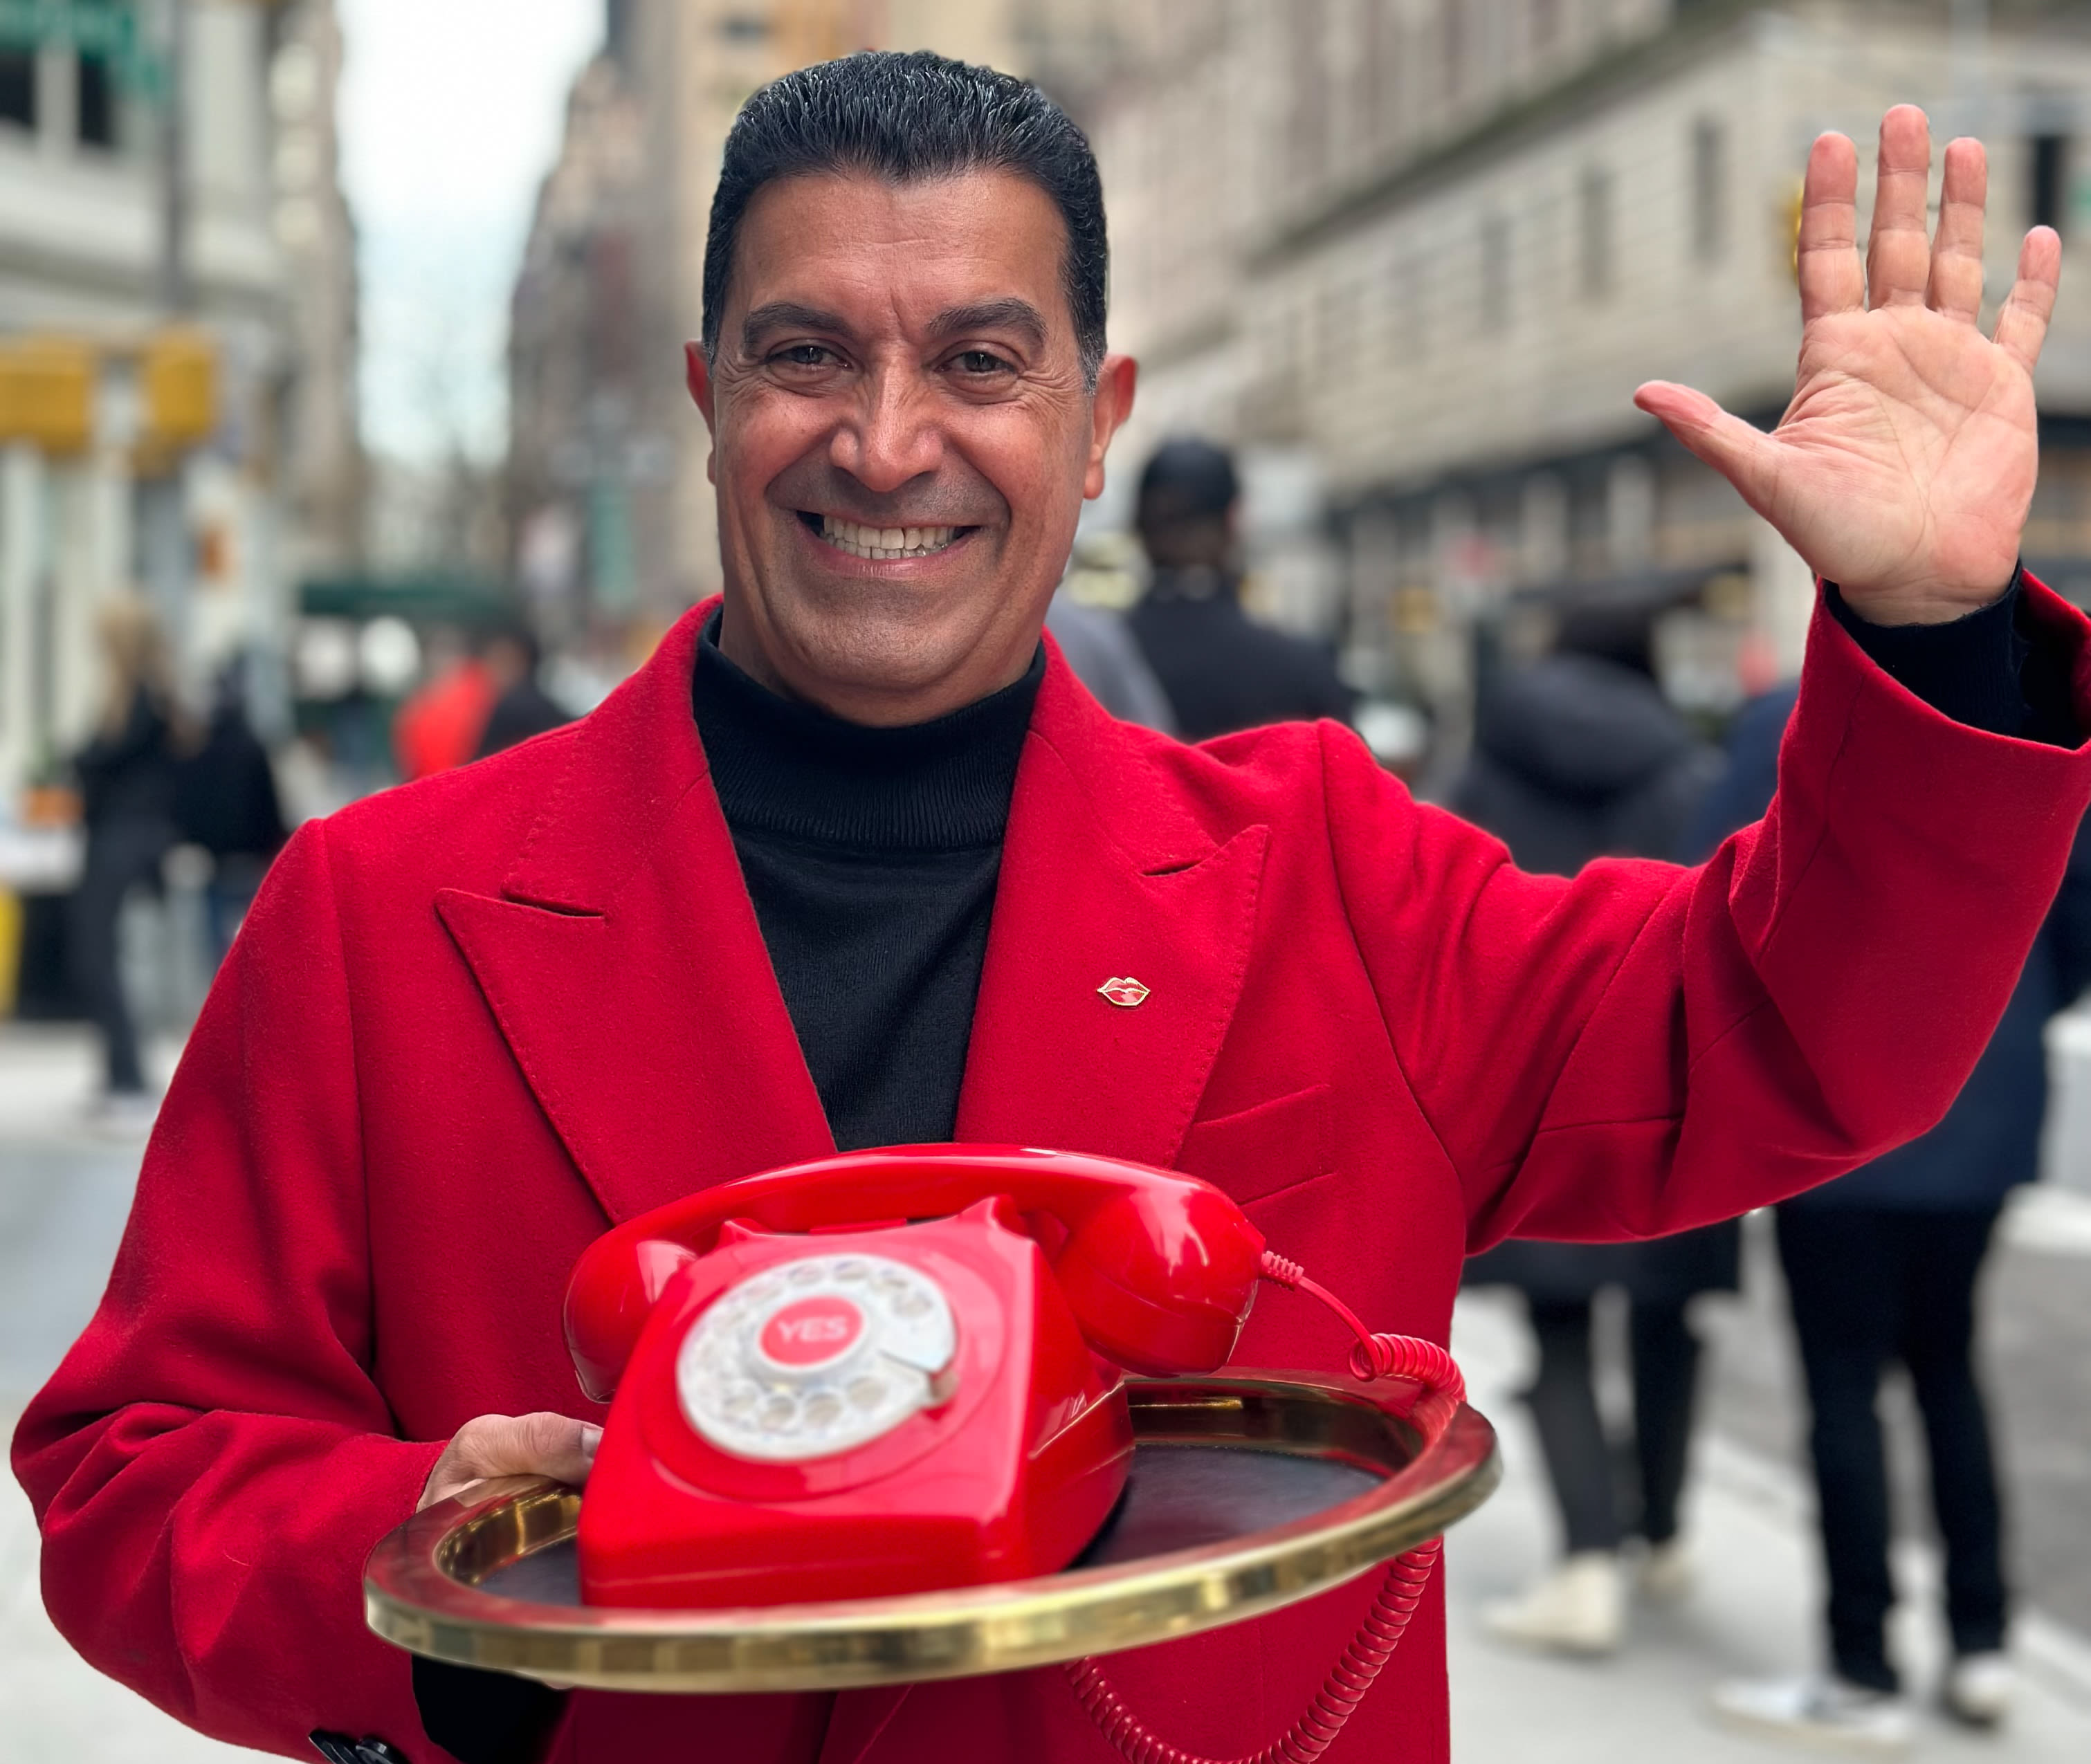 Virgin Hotels New York City doorman holding a gold tray with a red phone with the word "YES!" written on it